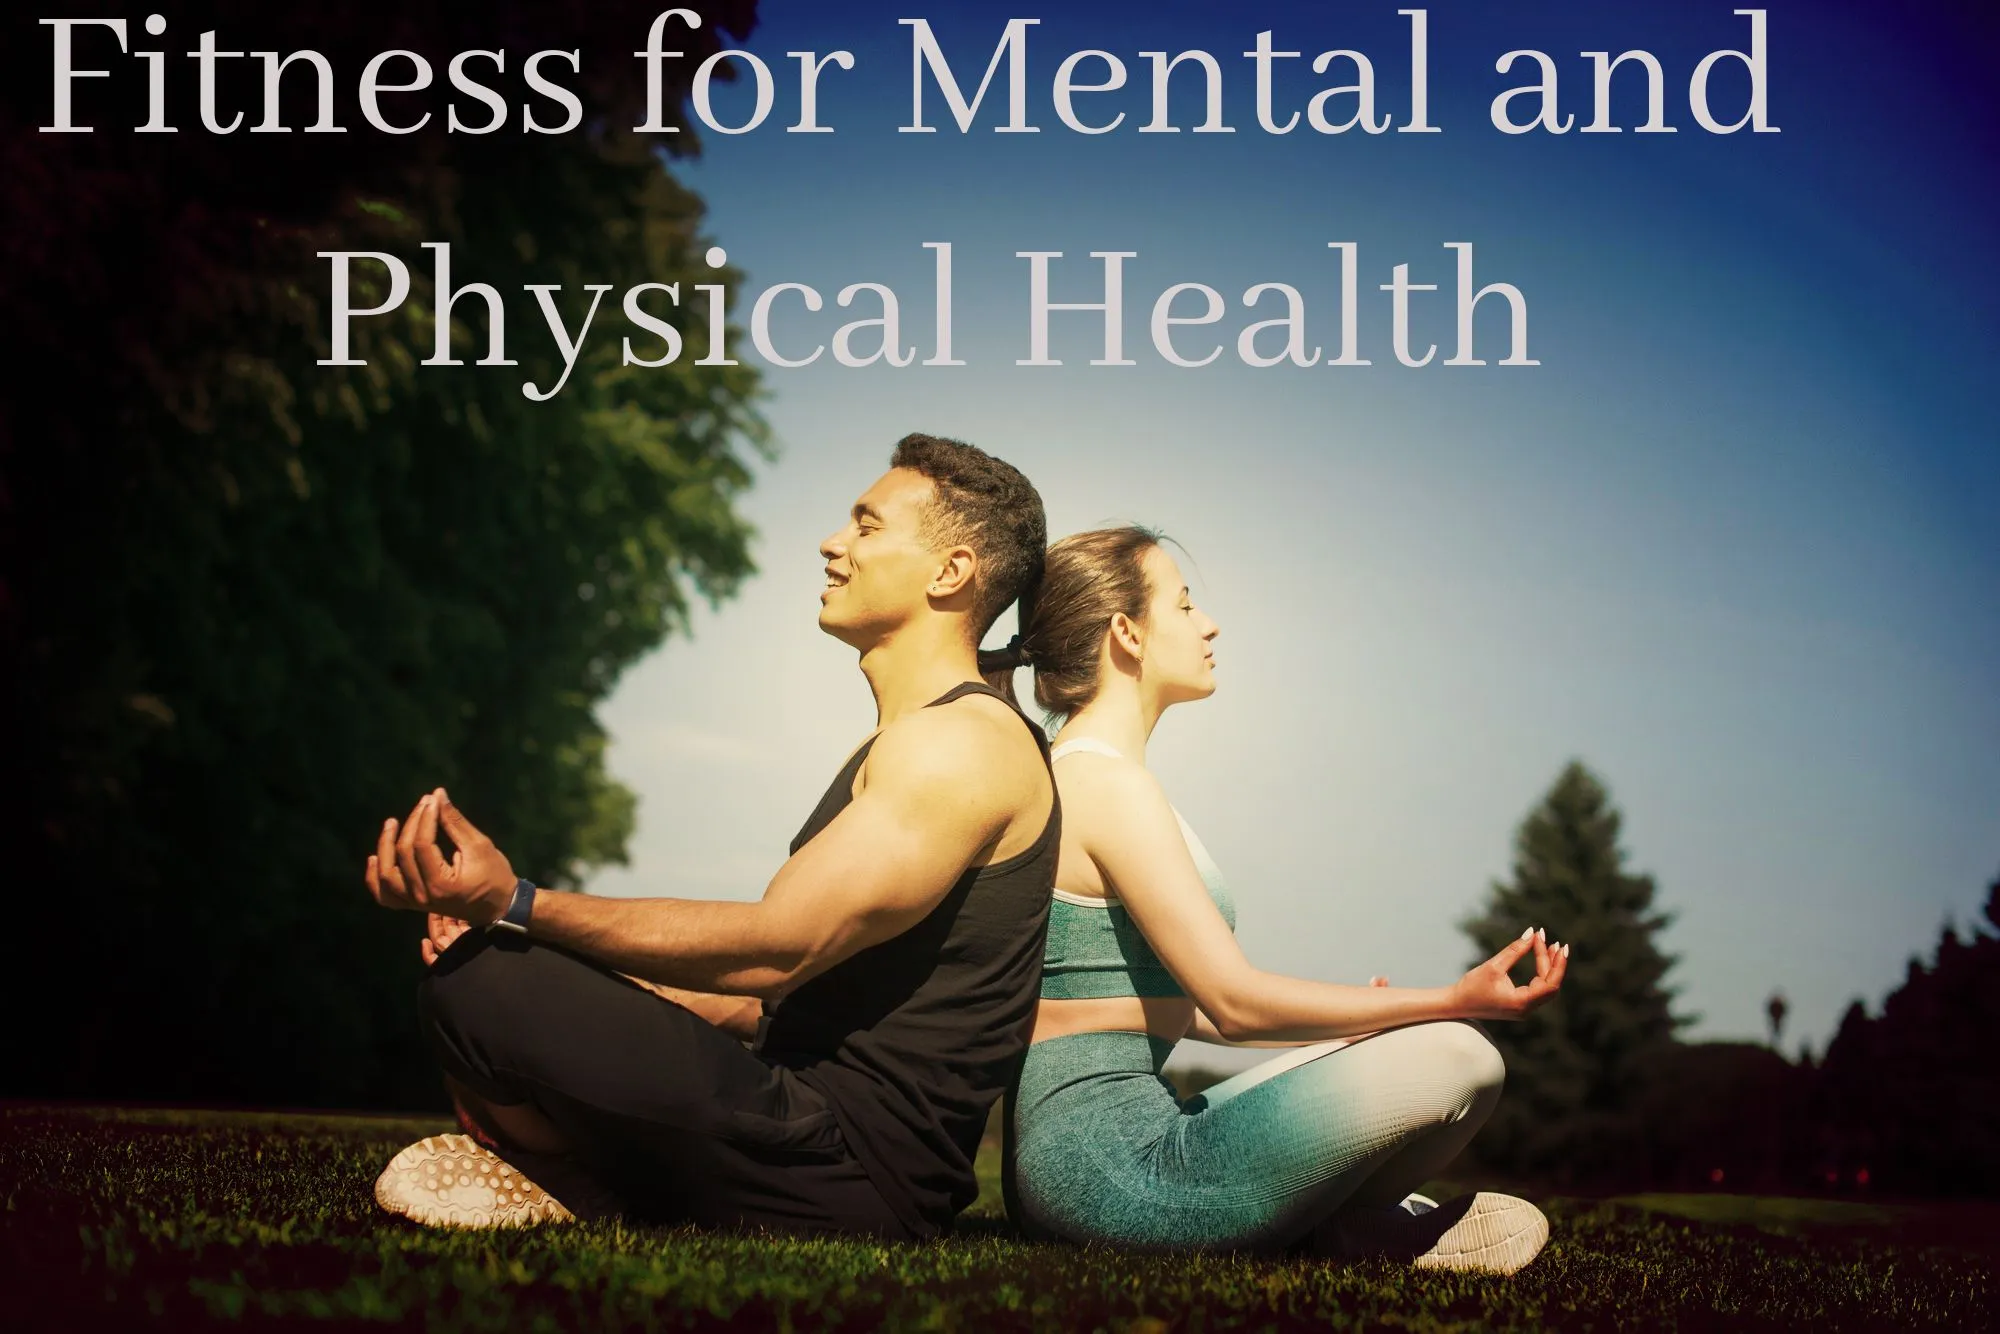 Fitness for Mental and Physical Health